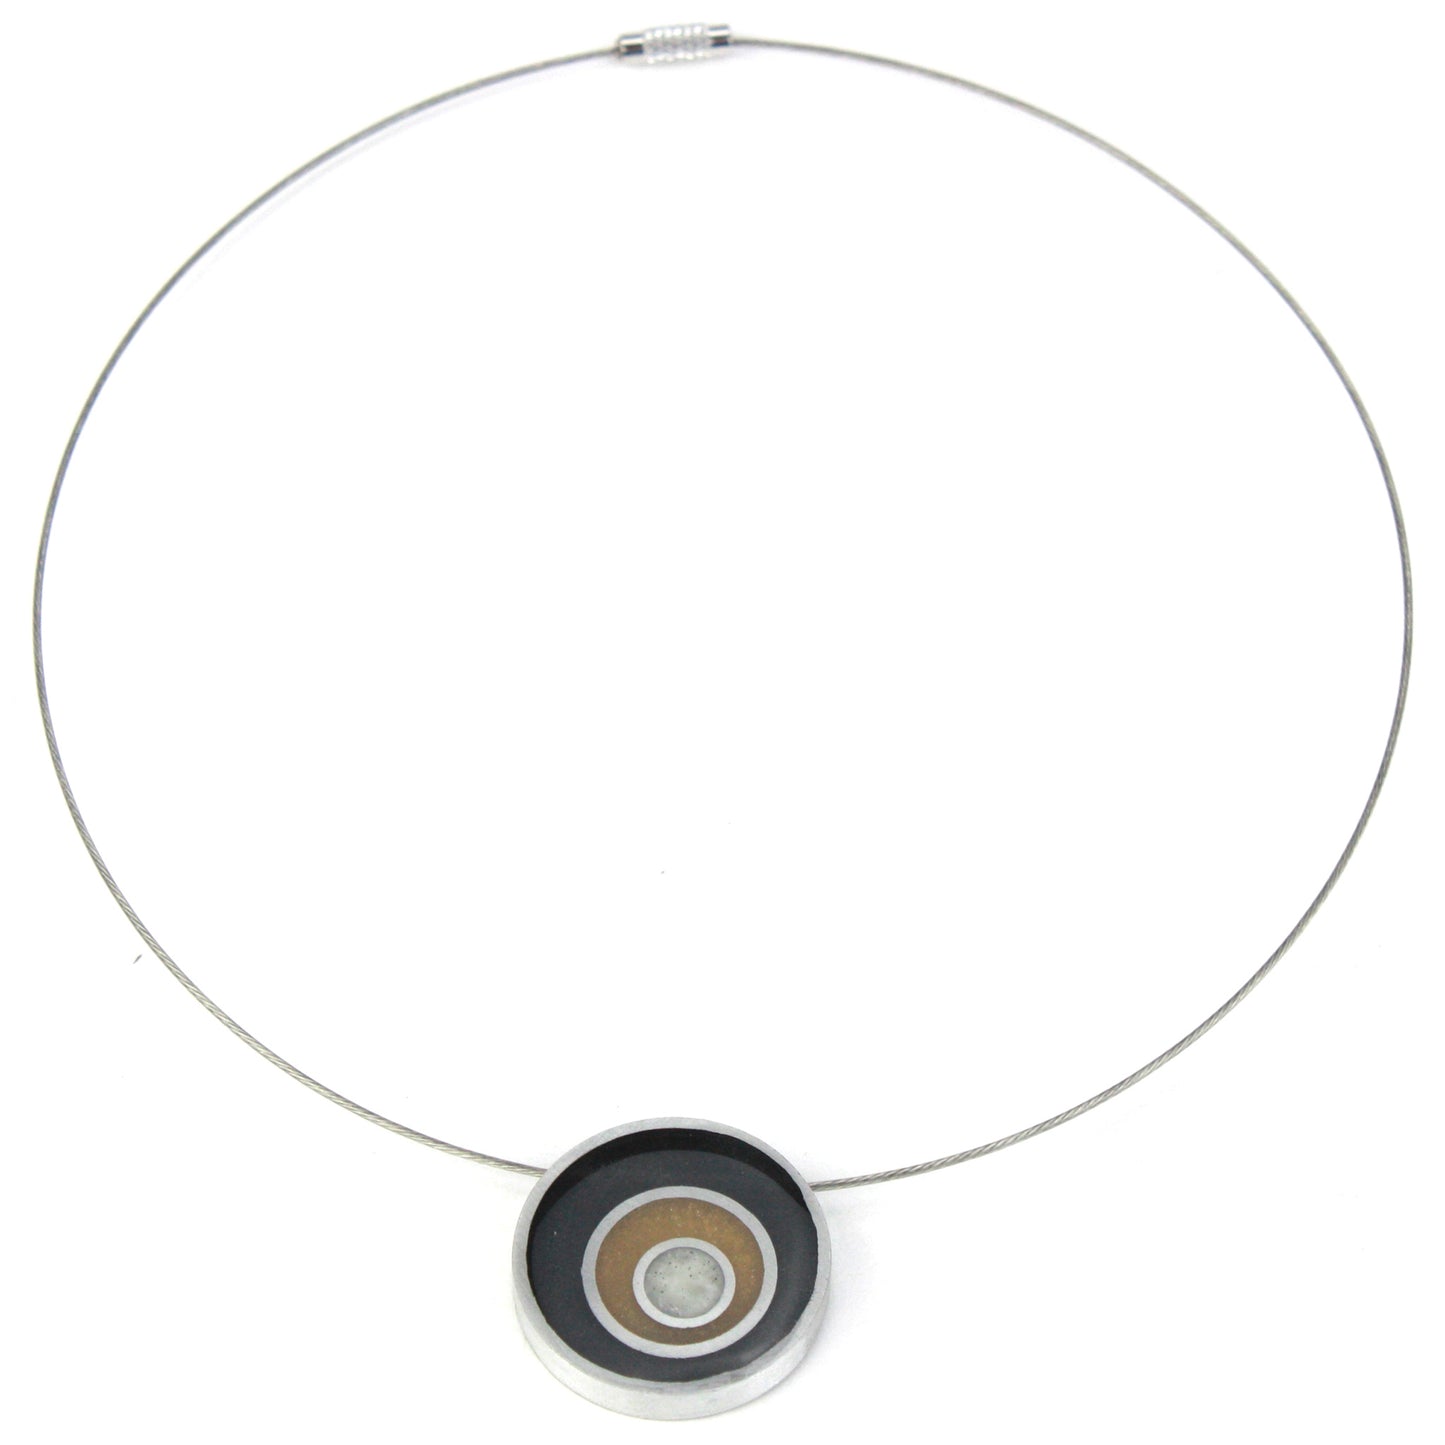 Resinique triple circle necklace - Black, gold and white